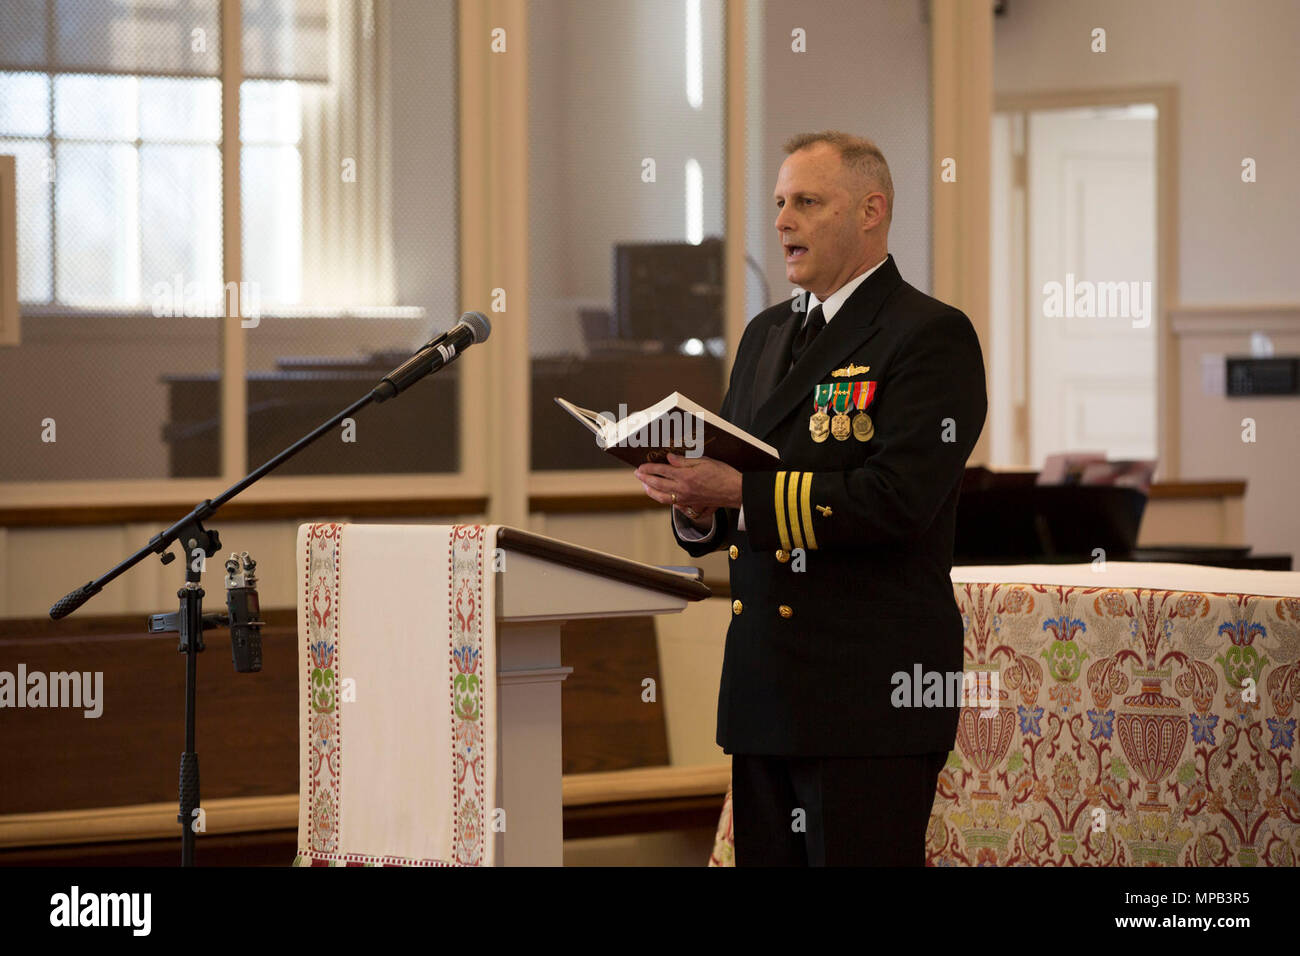 Chaplain Robert Etheridge, deputy command chaplain, Marine Corps Base Quantico, sings during the memorial service of retired U.S. Marine Corps Lt. Gen. Lawrence F. Snowden at the U.S. Marine Memorial Chapel, Quantico, Va., April 8, 2017. Snowden retired in 1979 after nearly 40 years of service, fought in engagements during World War II, the Korean War, and Vietnam. He passed away Feb. 18, 2017. He was prominently known after retirement for organizing joint 'Reunion of Honor' missions which is an opportunity for Japanese and U.S. veterans and their families, dignitaries, leaders and service mem Stock Photo